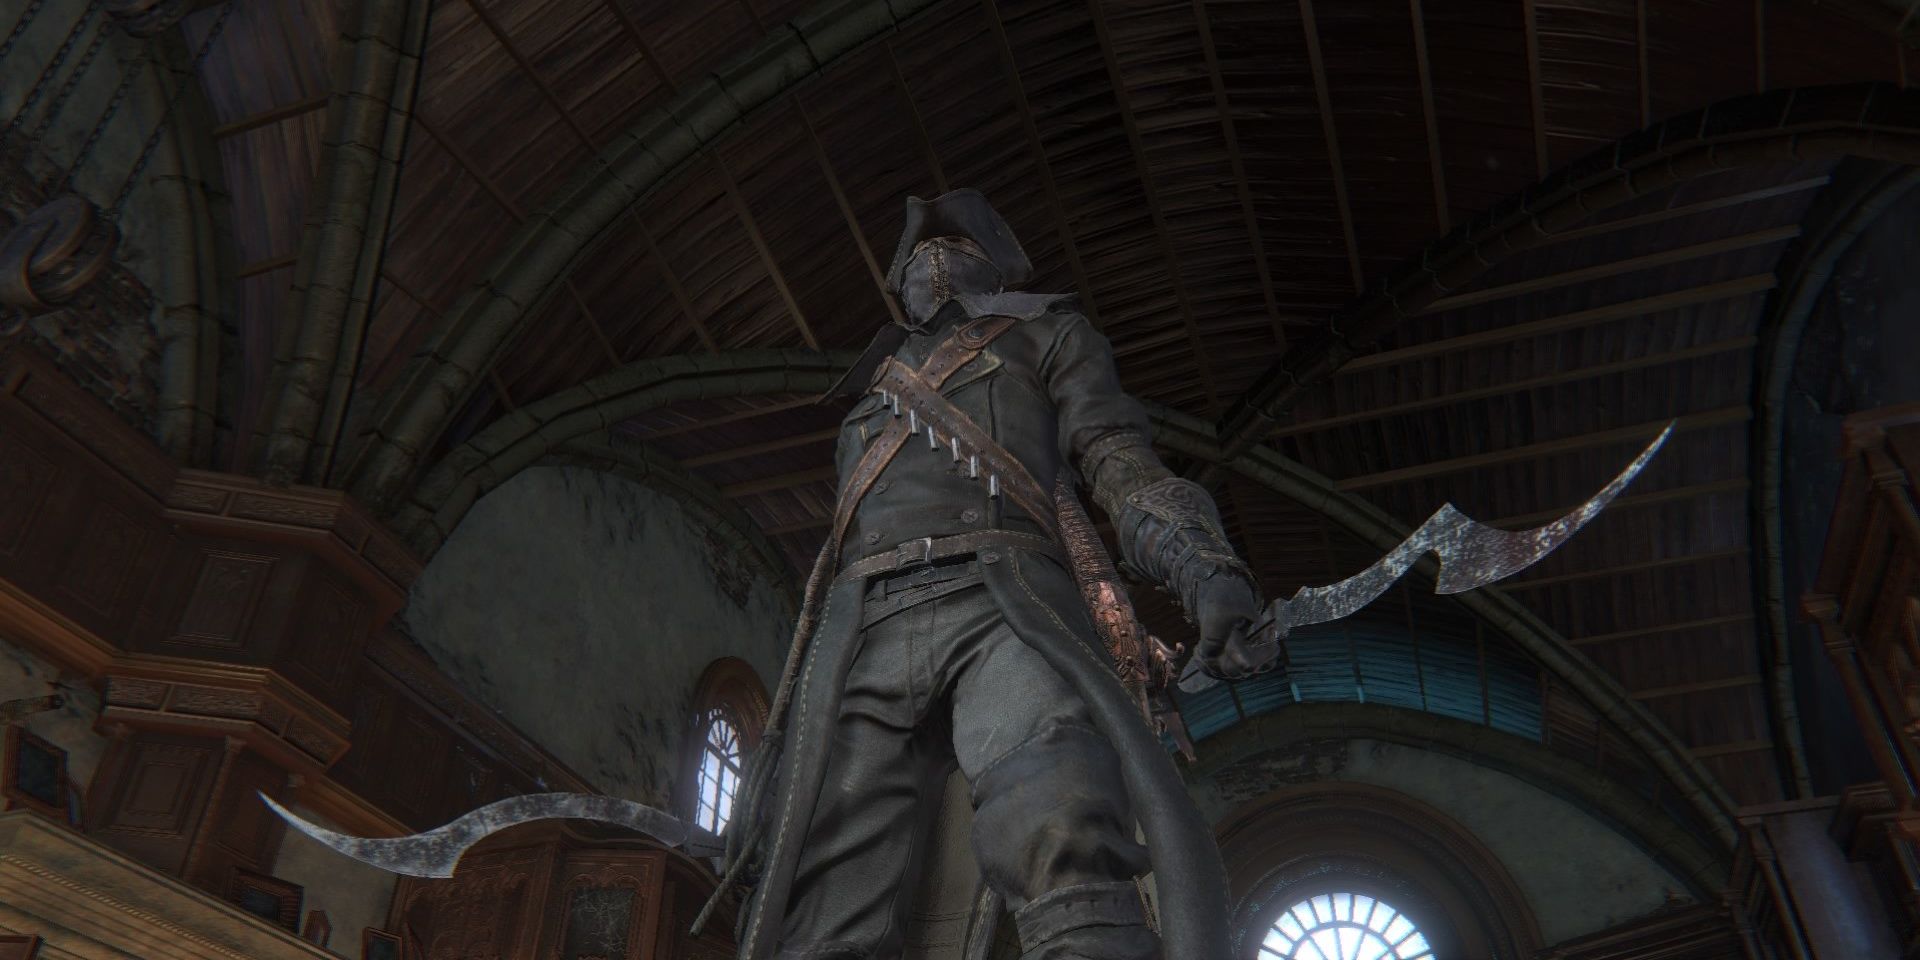 A bloodborne character wielding the Blade of Mercy.